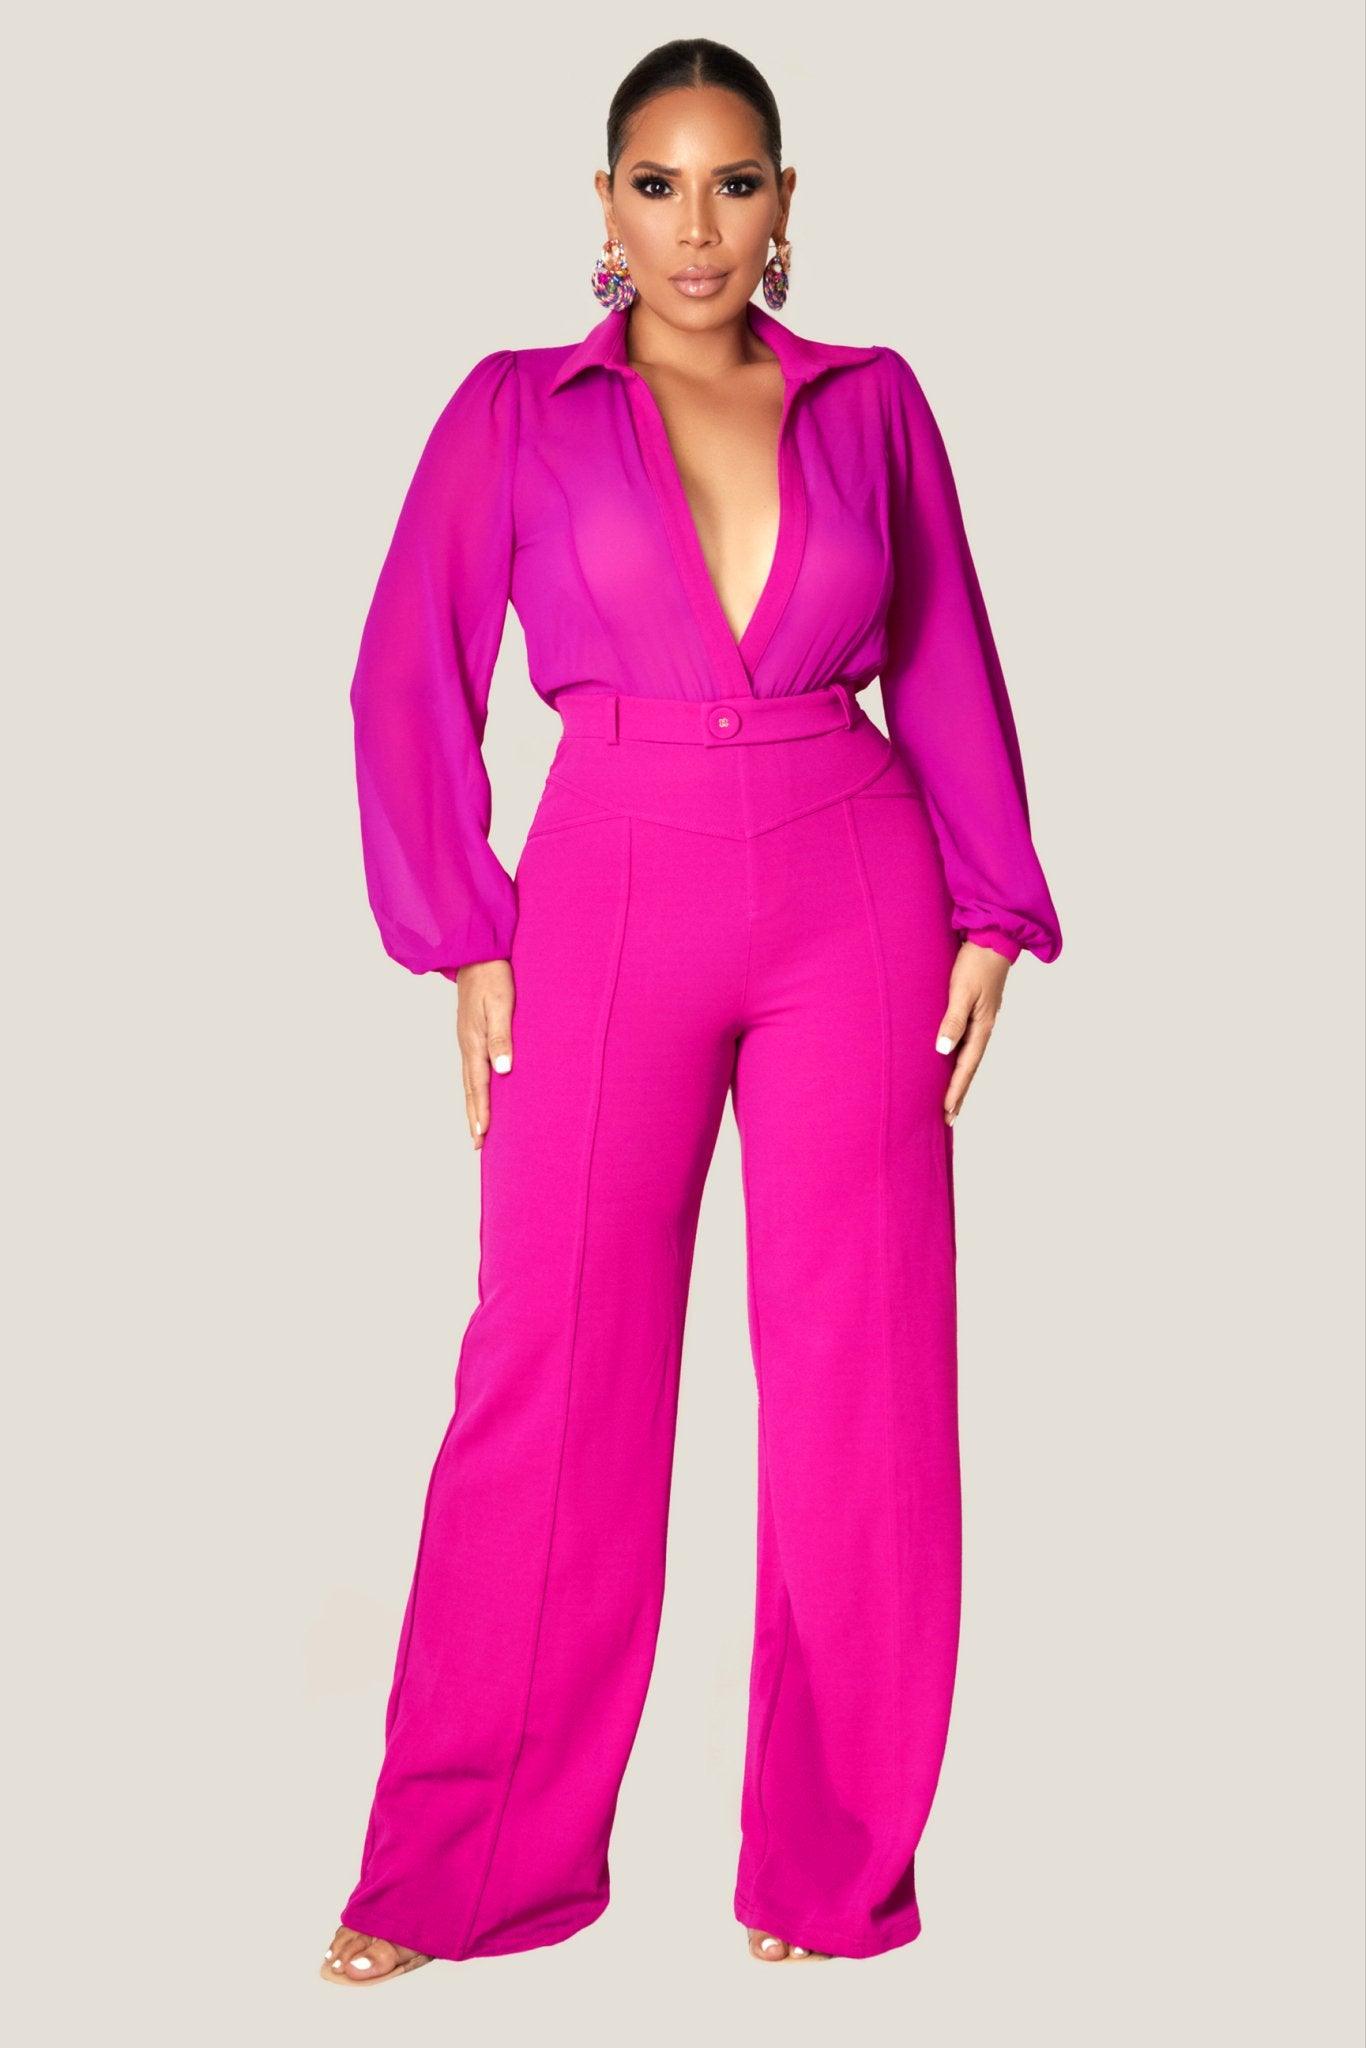 Angelica Long Sleeves Jumpsuit - MY SEXY STYLES